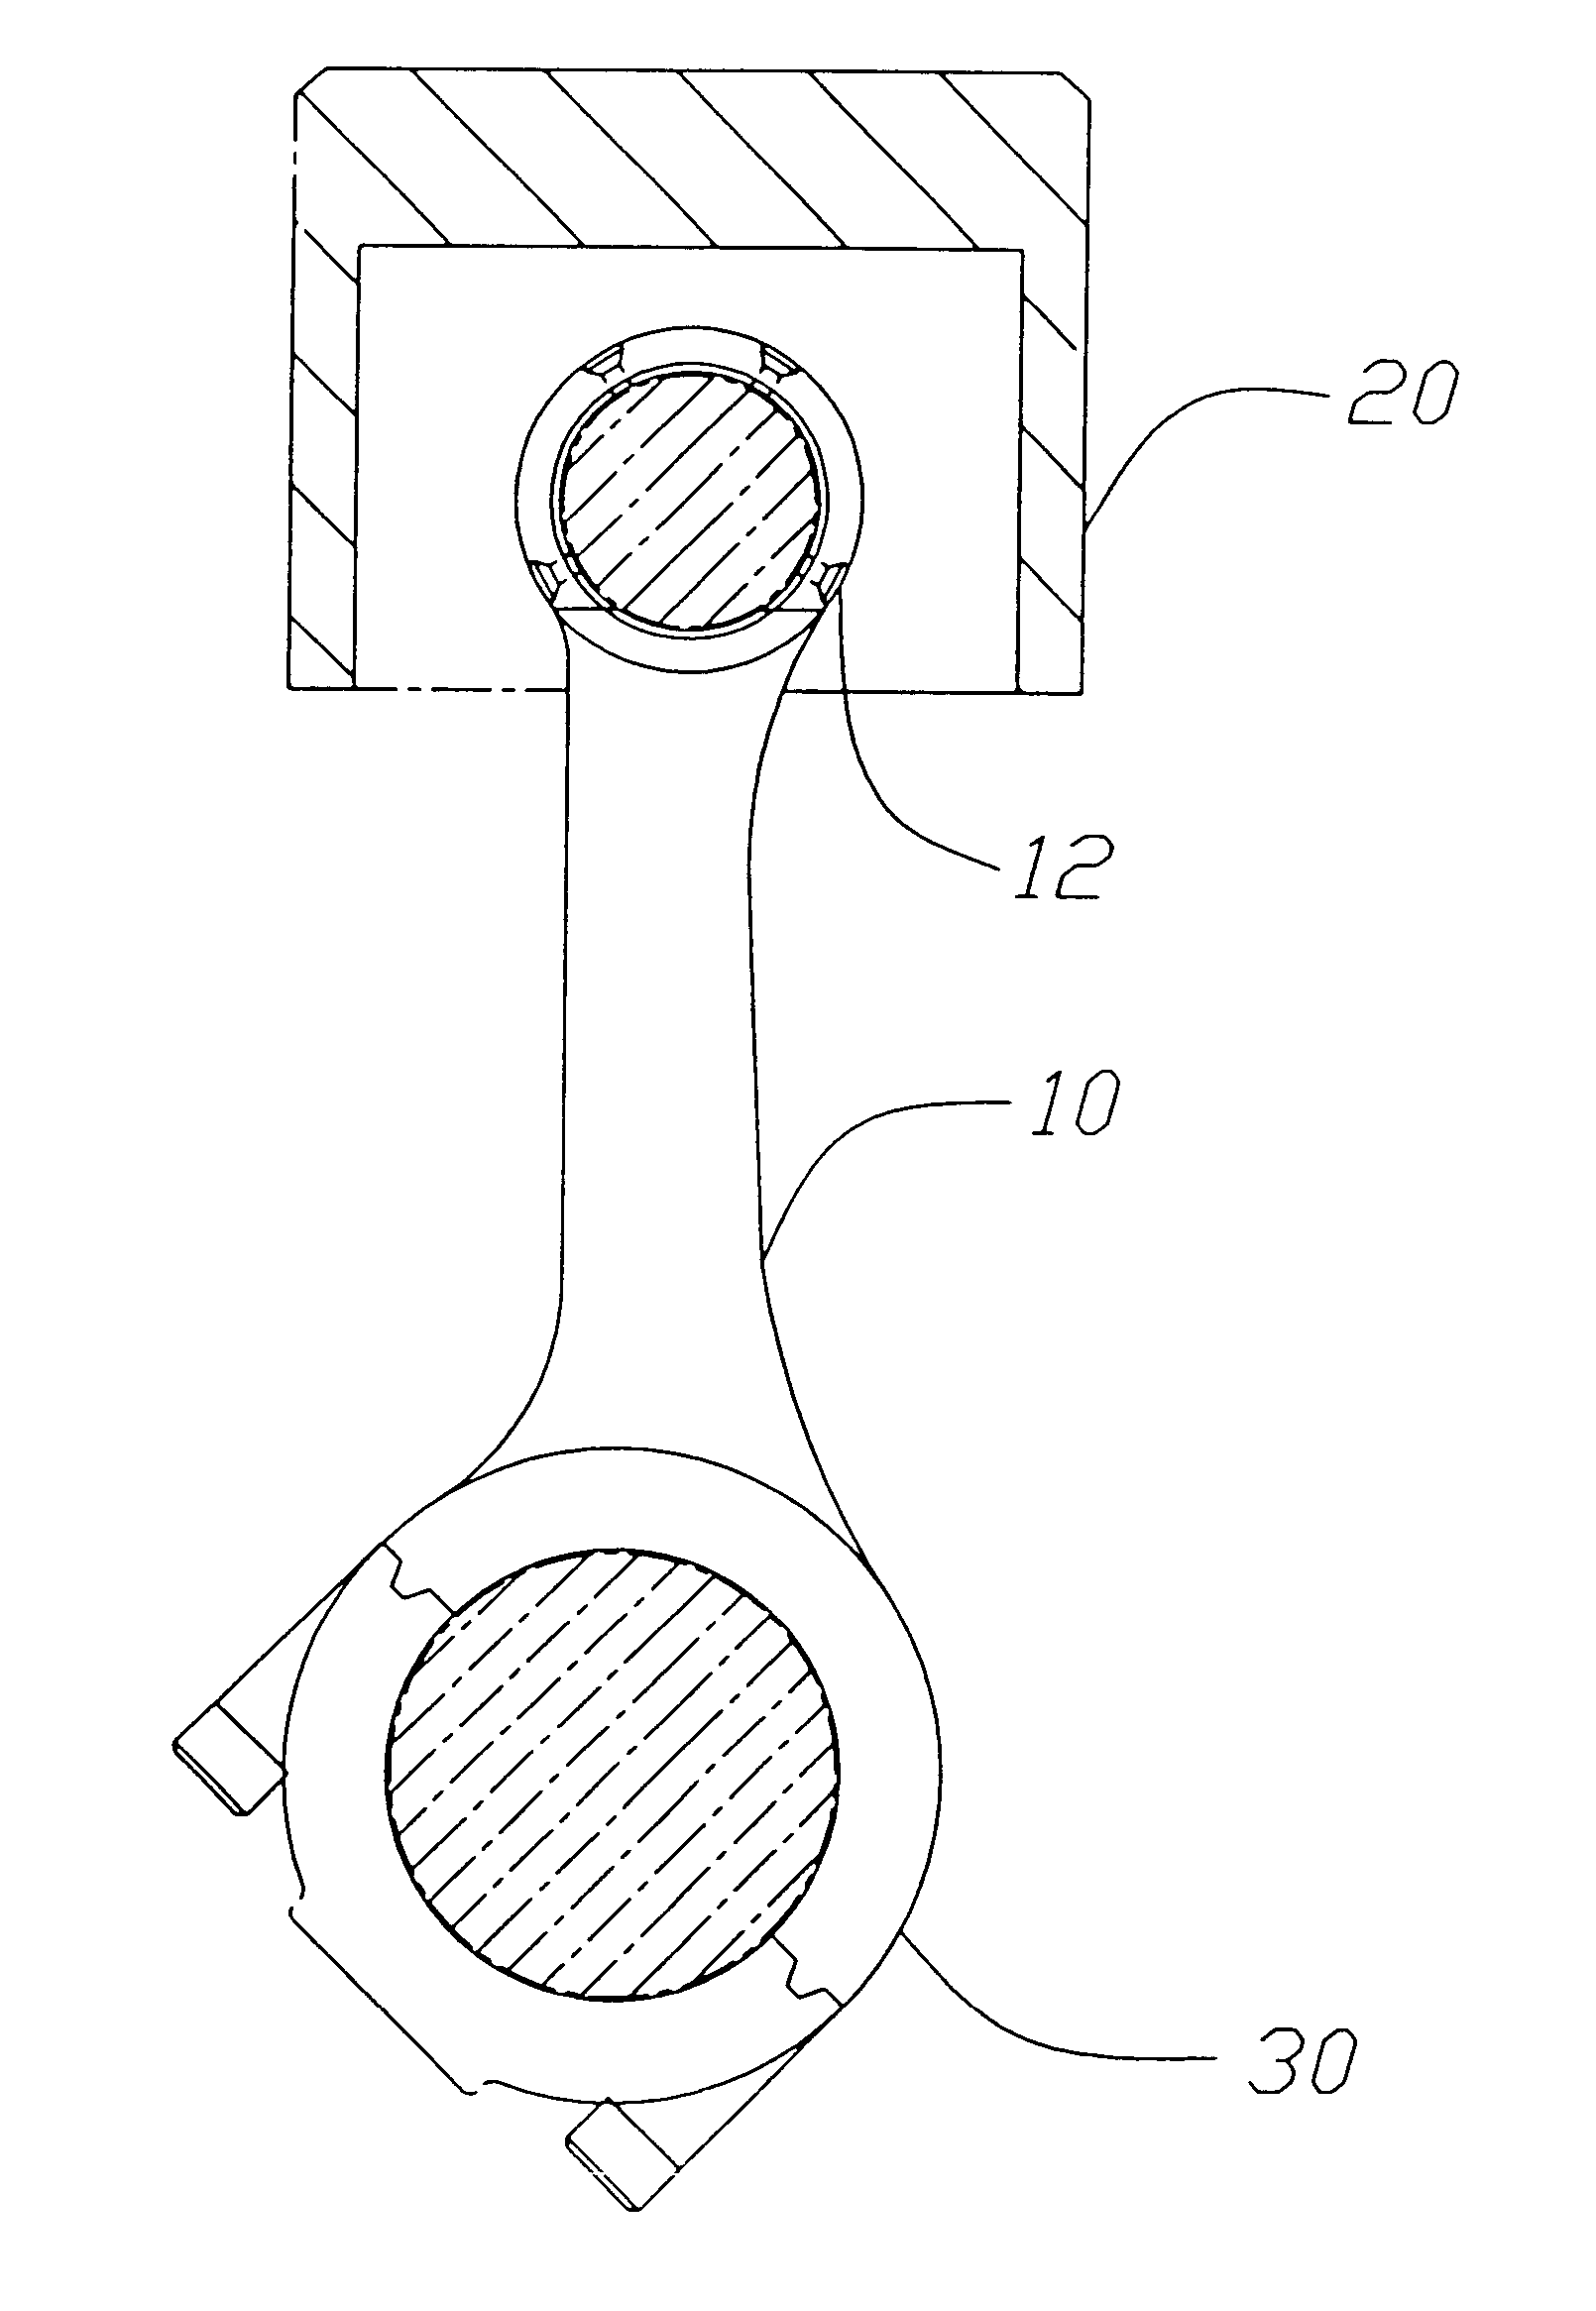 Connecting rod structure